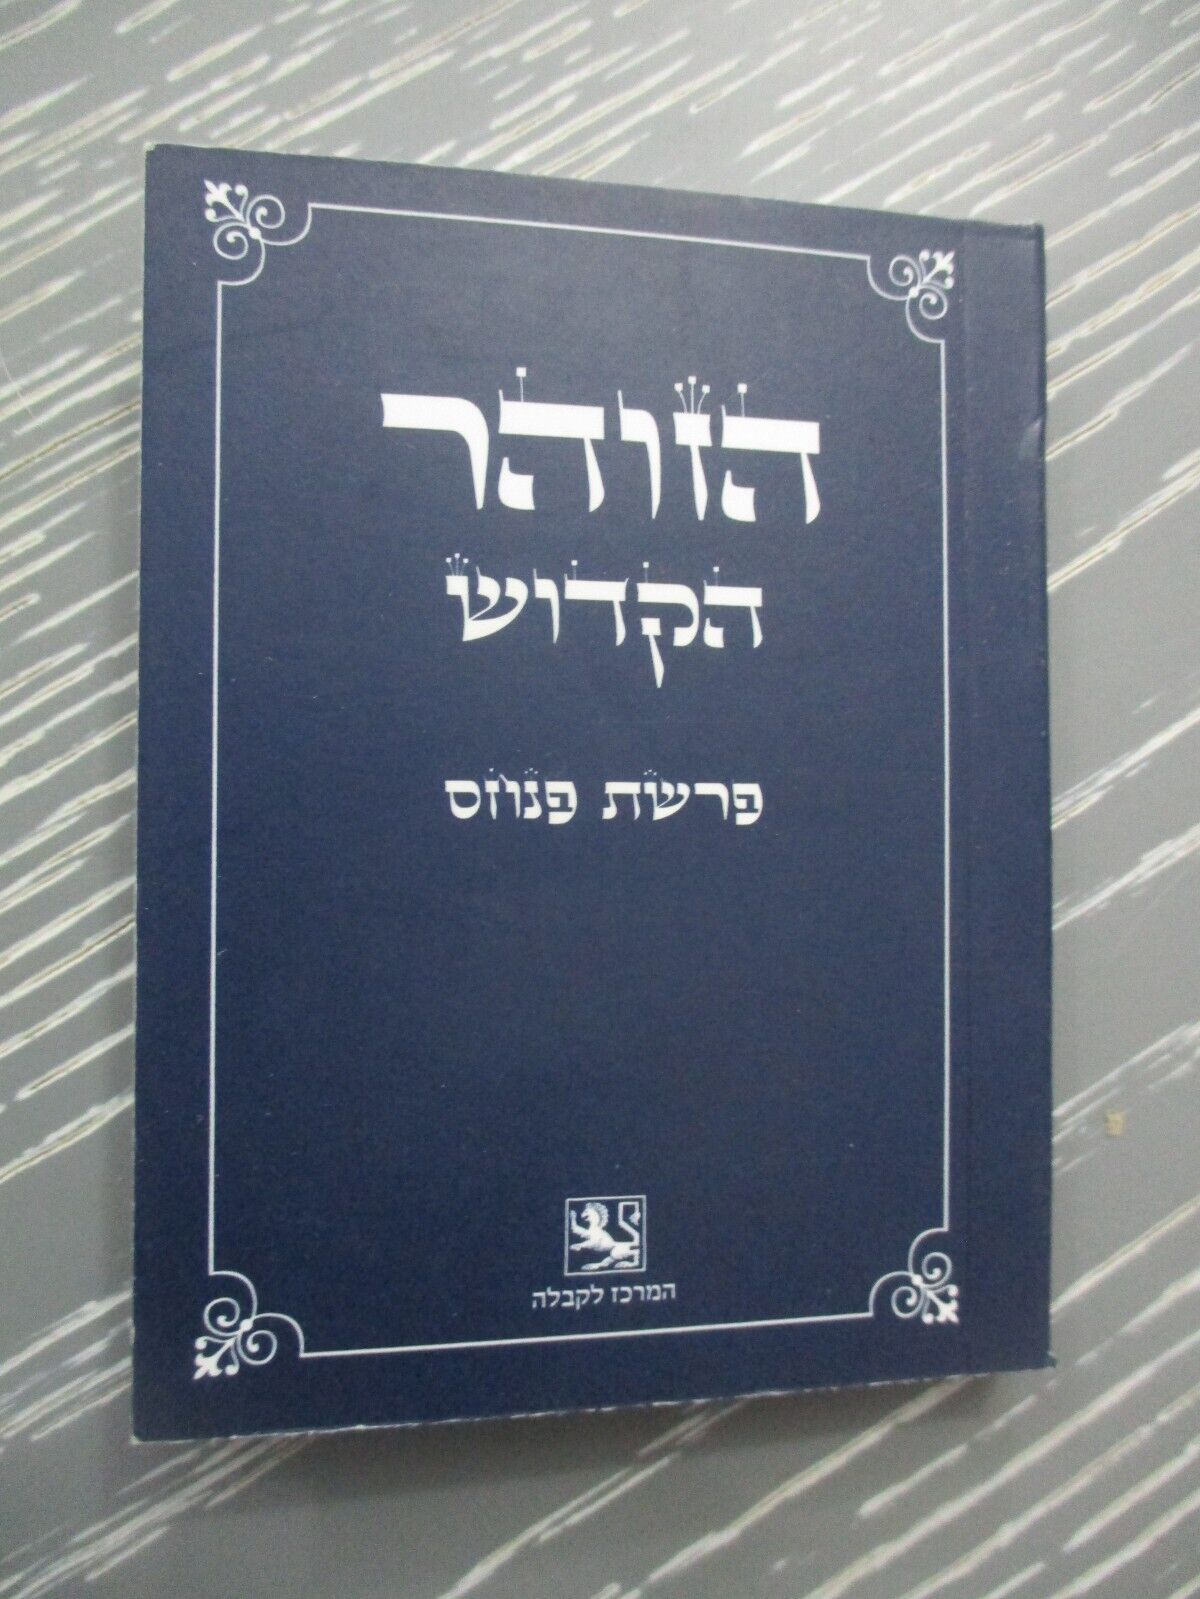 The Holy Zohar, Parashat Pinchas, paperback,  143 pp, a small size book, Israel.